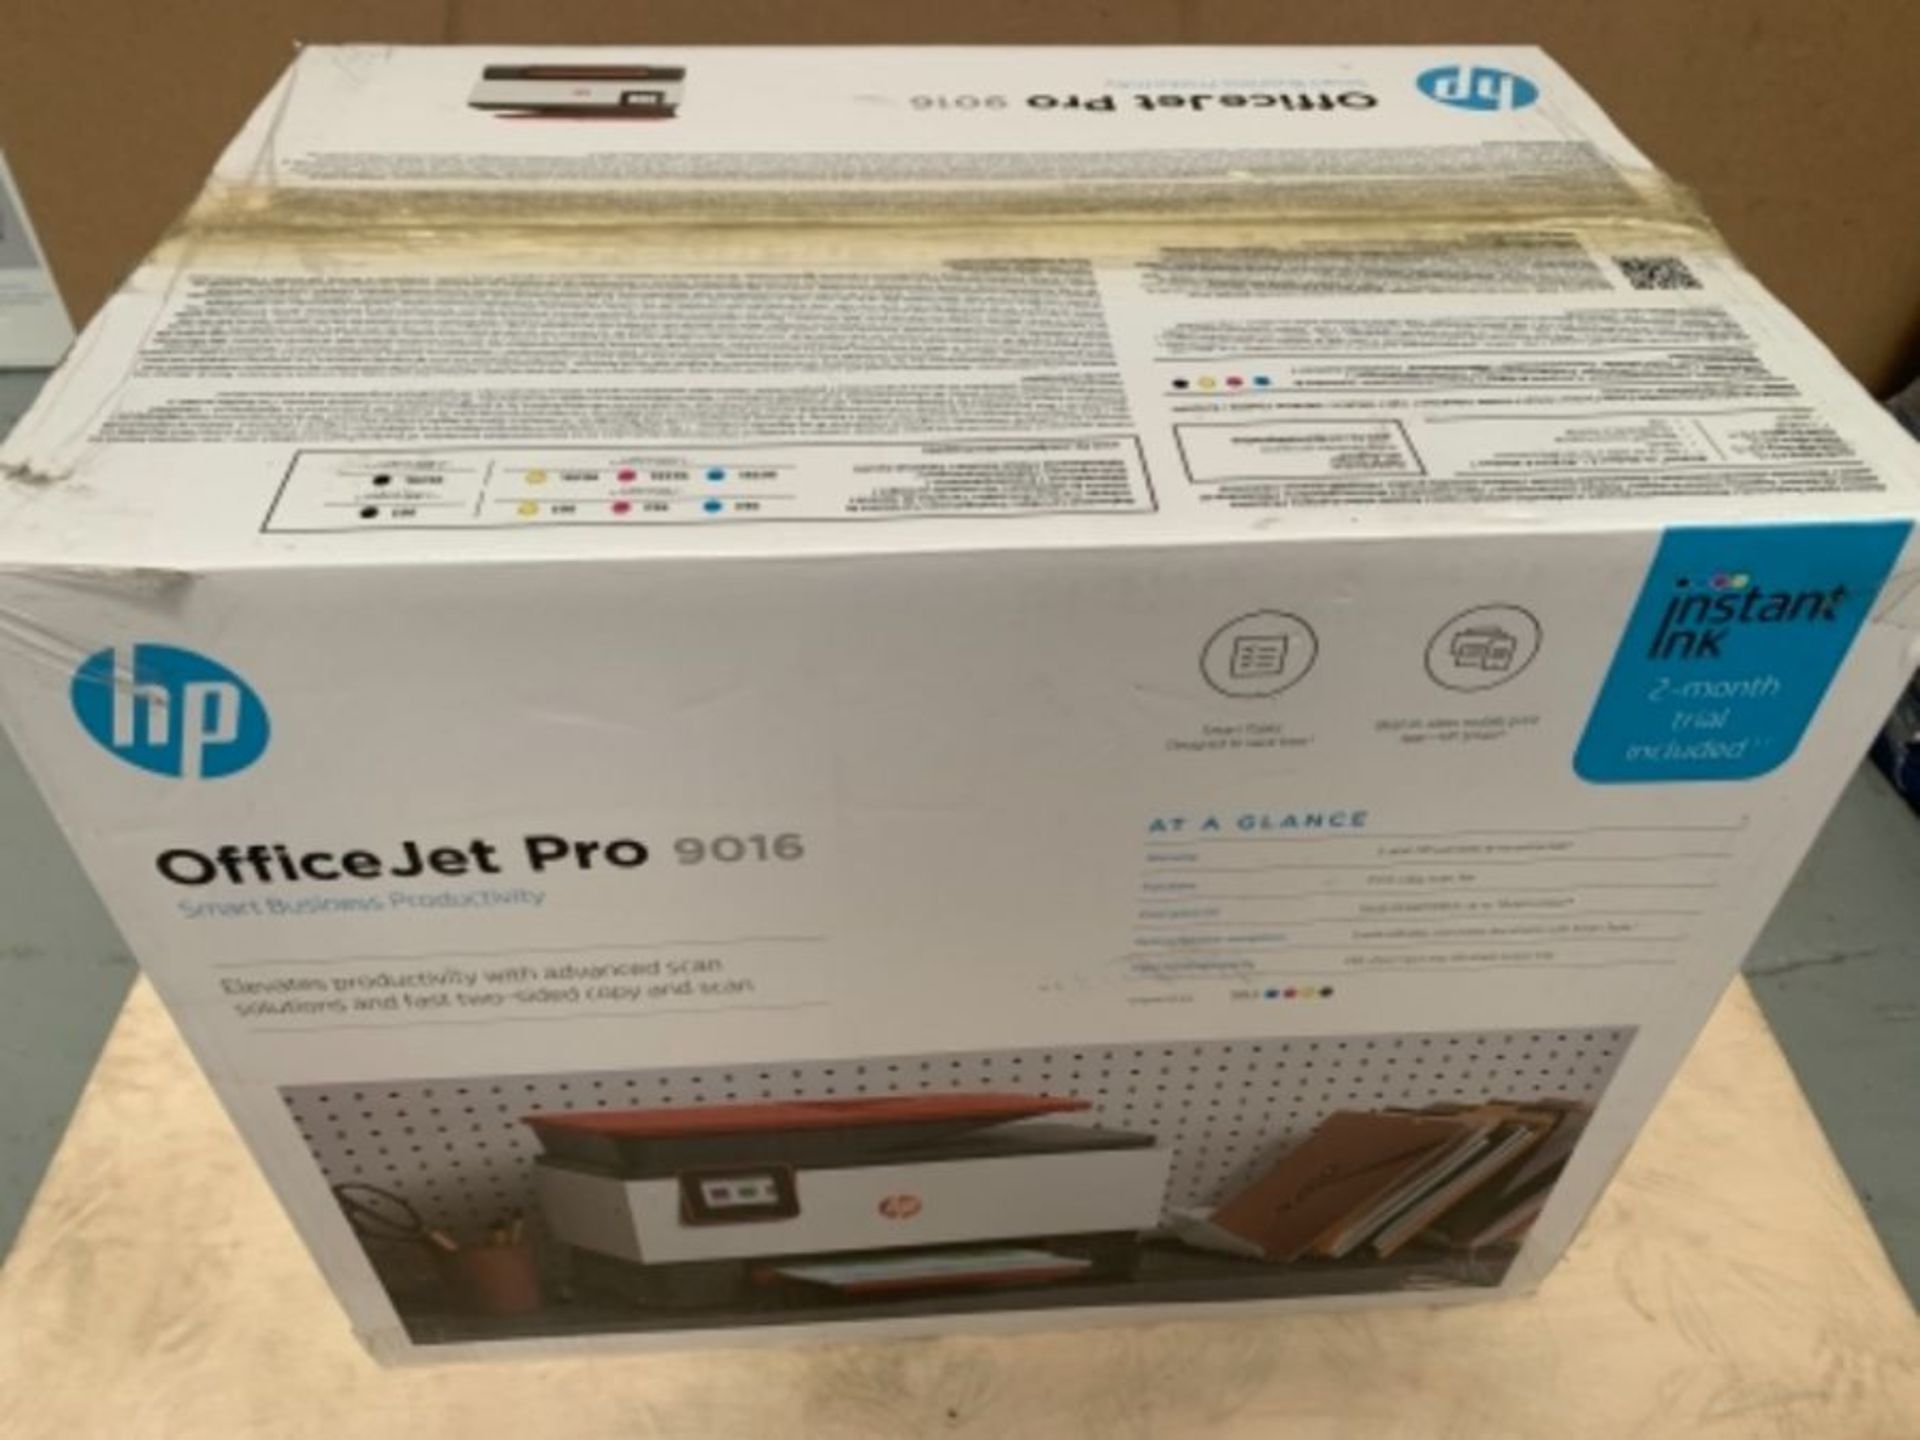 RRP £175.00 HP OfficeJet Pro 9010 All-in-One Wireless Printer, Instant Ink Ready, Print, Scan, Cop - Image 2 of 3